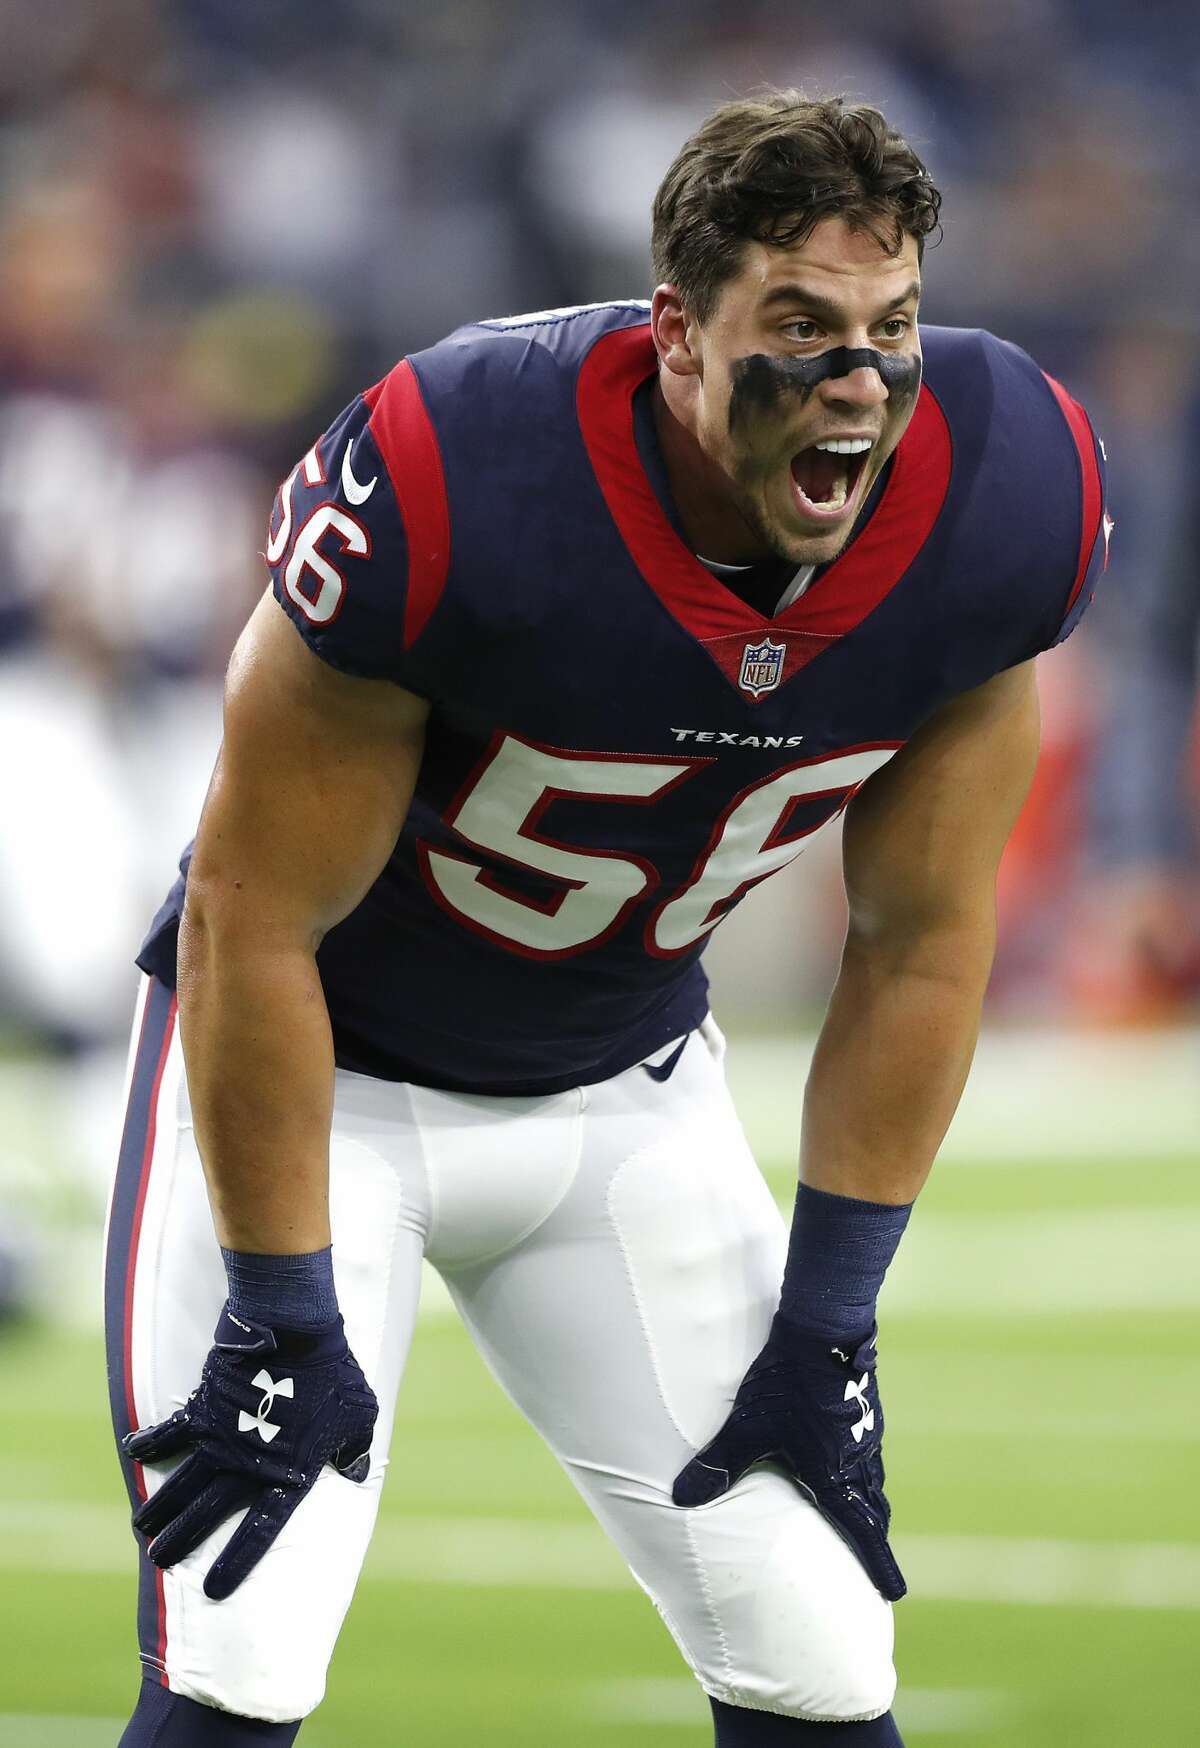 Houston Texans inside linebacker Brian Cushing (56) makes a face to someone on the sideline on the field before the start of an NFL preseason game at NRG Stadium, Saturday, Aug. 19, 2017, in Houston. ( Karen Warren / Houston Chronicle )